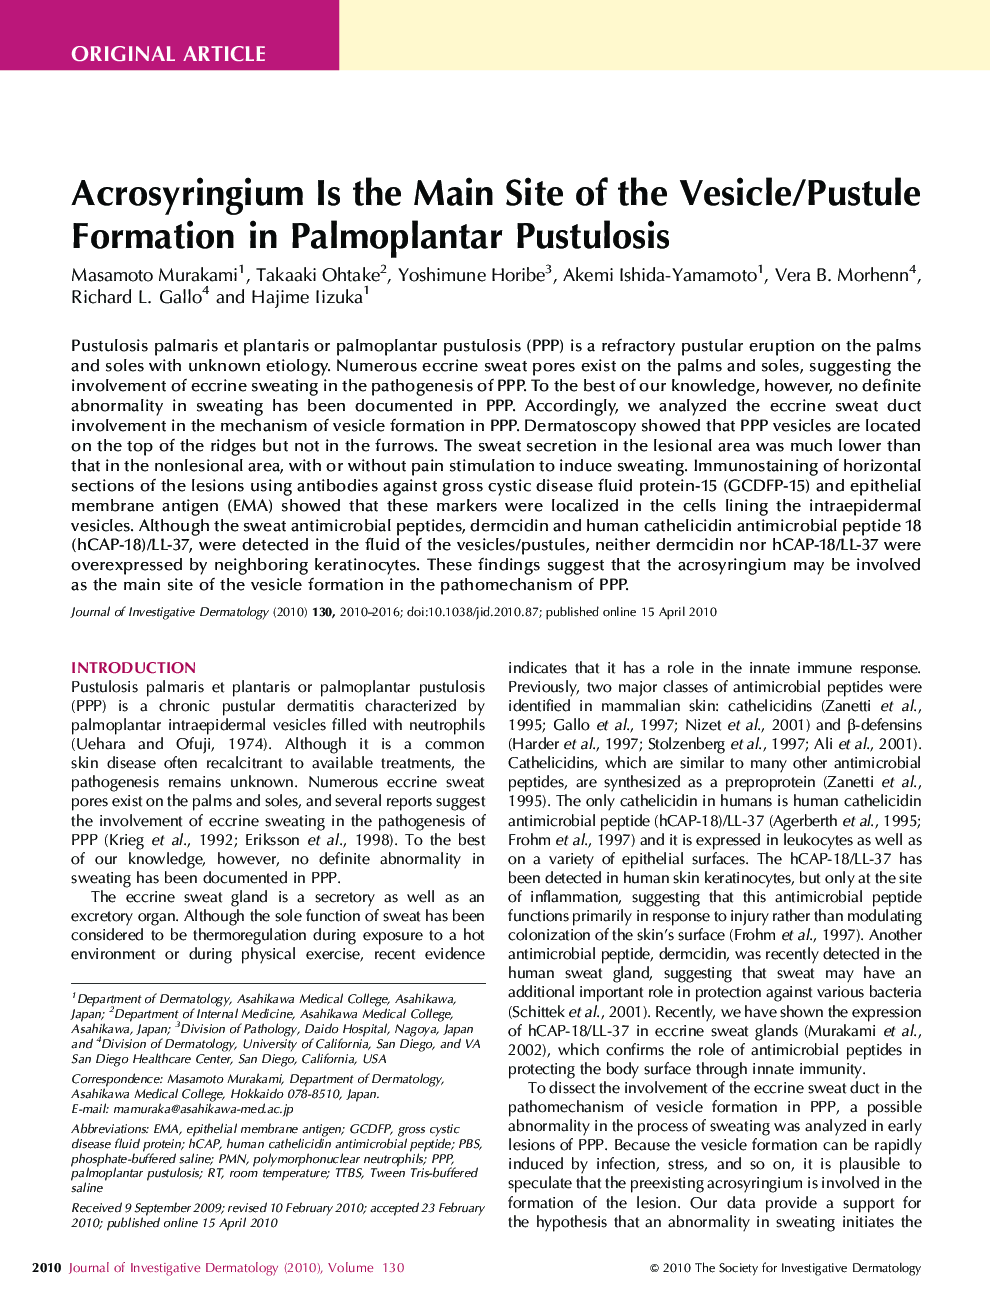 Acrosyringium Is the Main Site of the Vesicle/Pustule Formation in Palmoplantar Pustulosis 